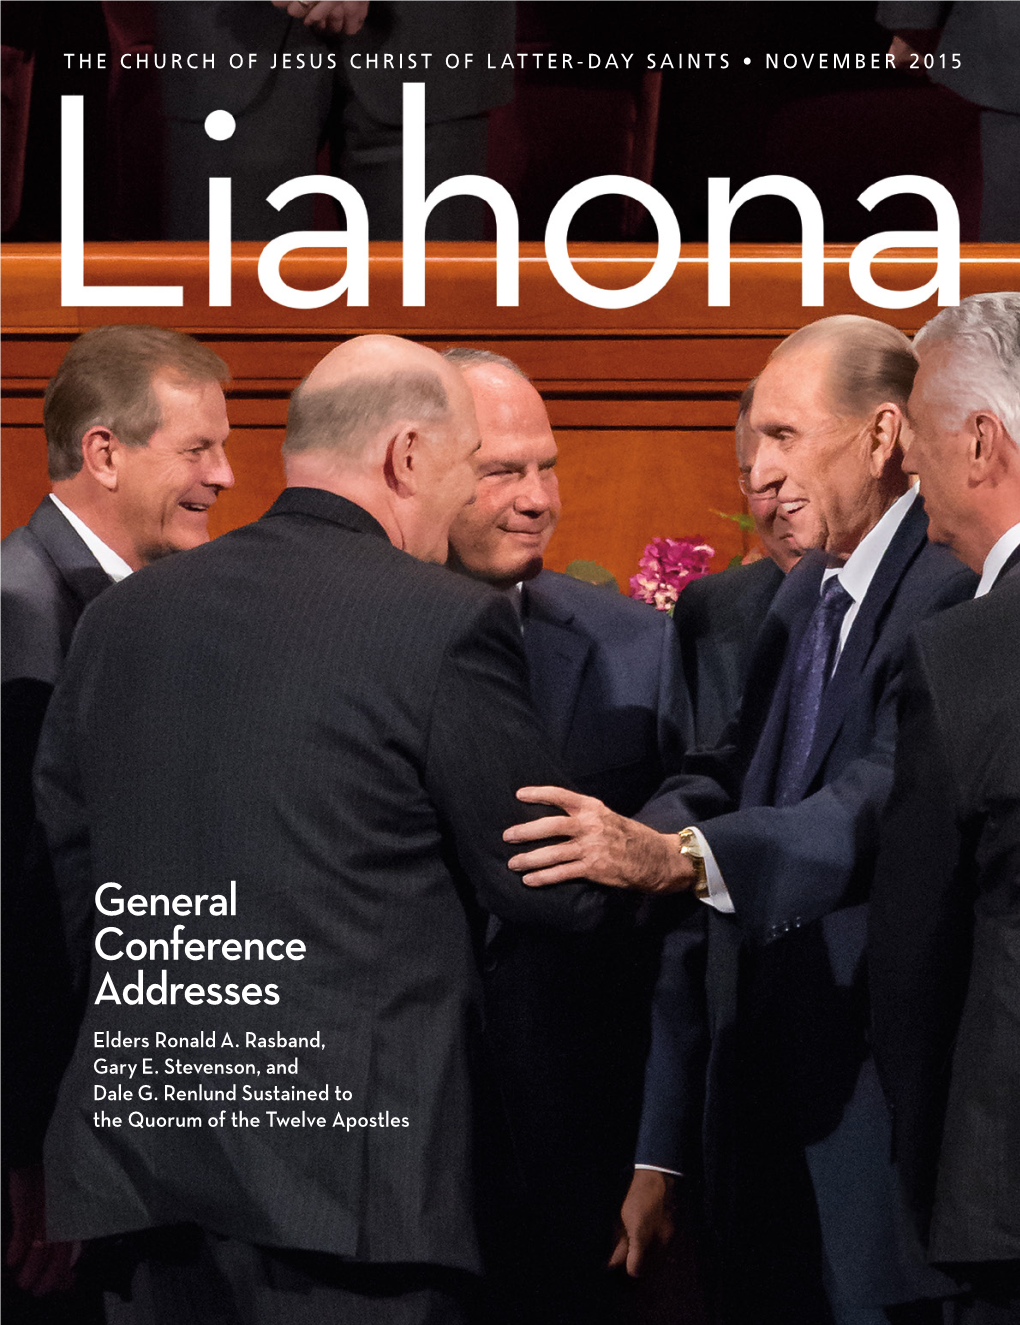 LIAHONA 12571 International Magazine of the Church of Jesus Christ of Latter-Day Saints the First Presidency: Thomas S